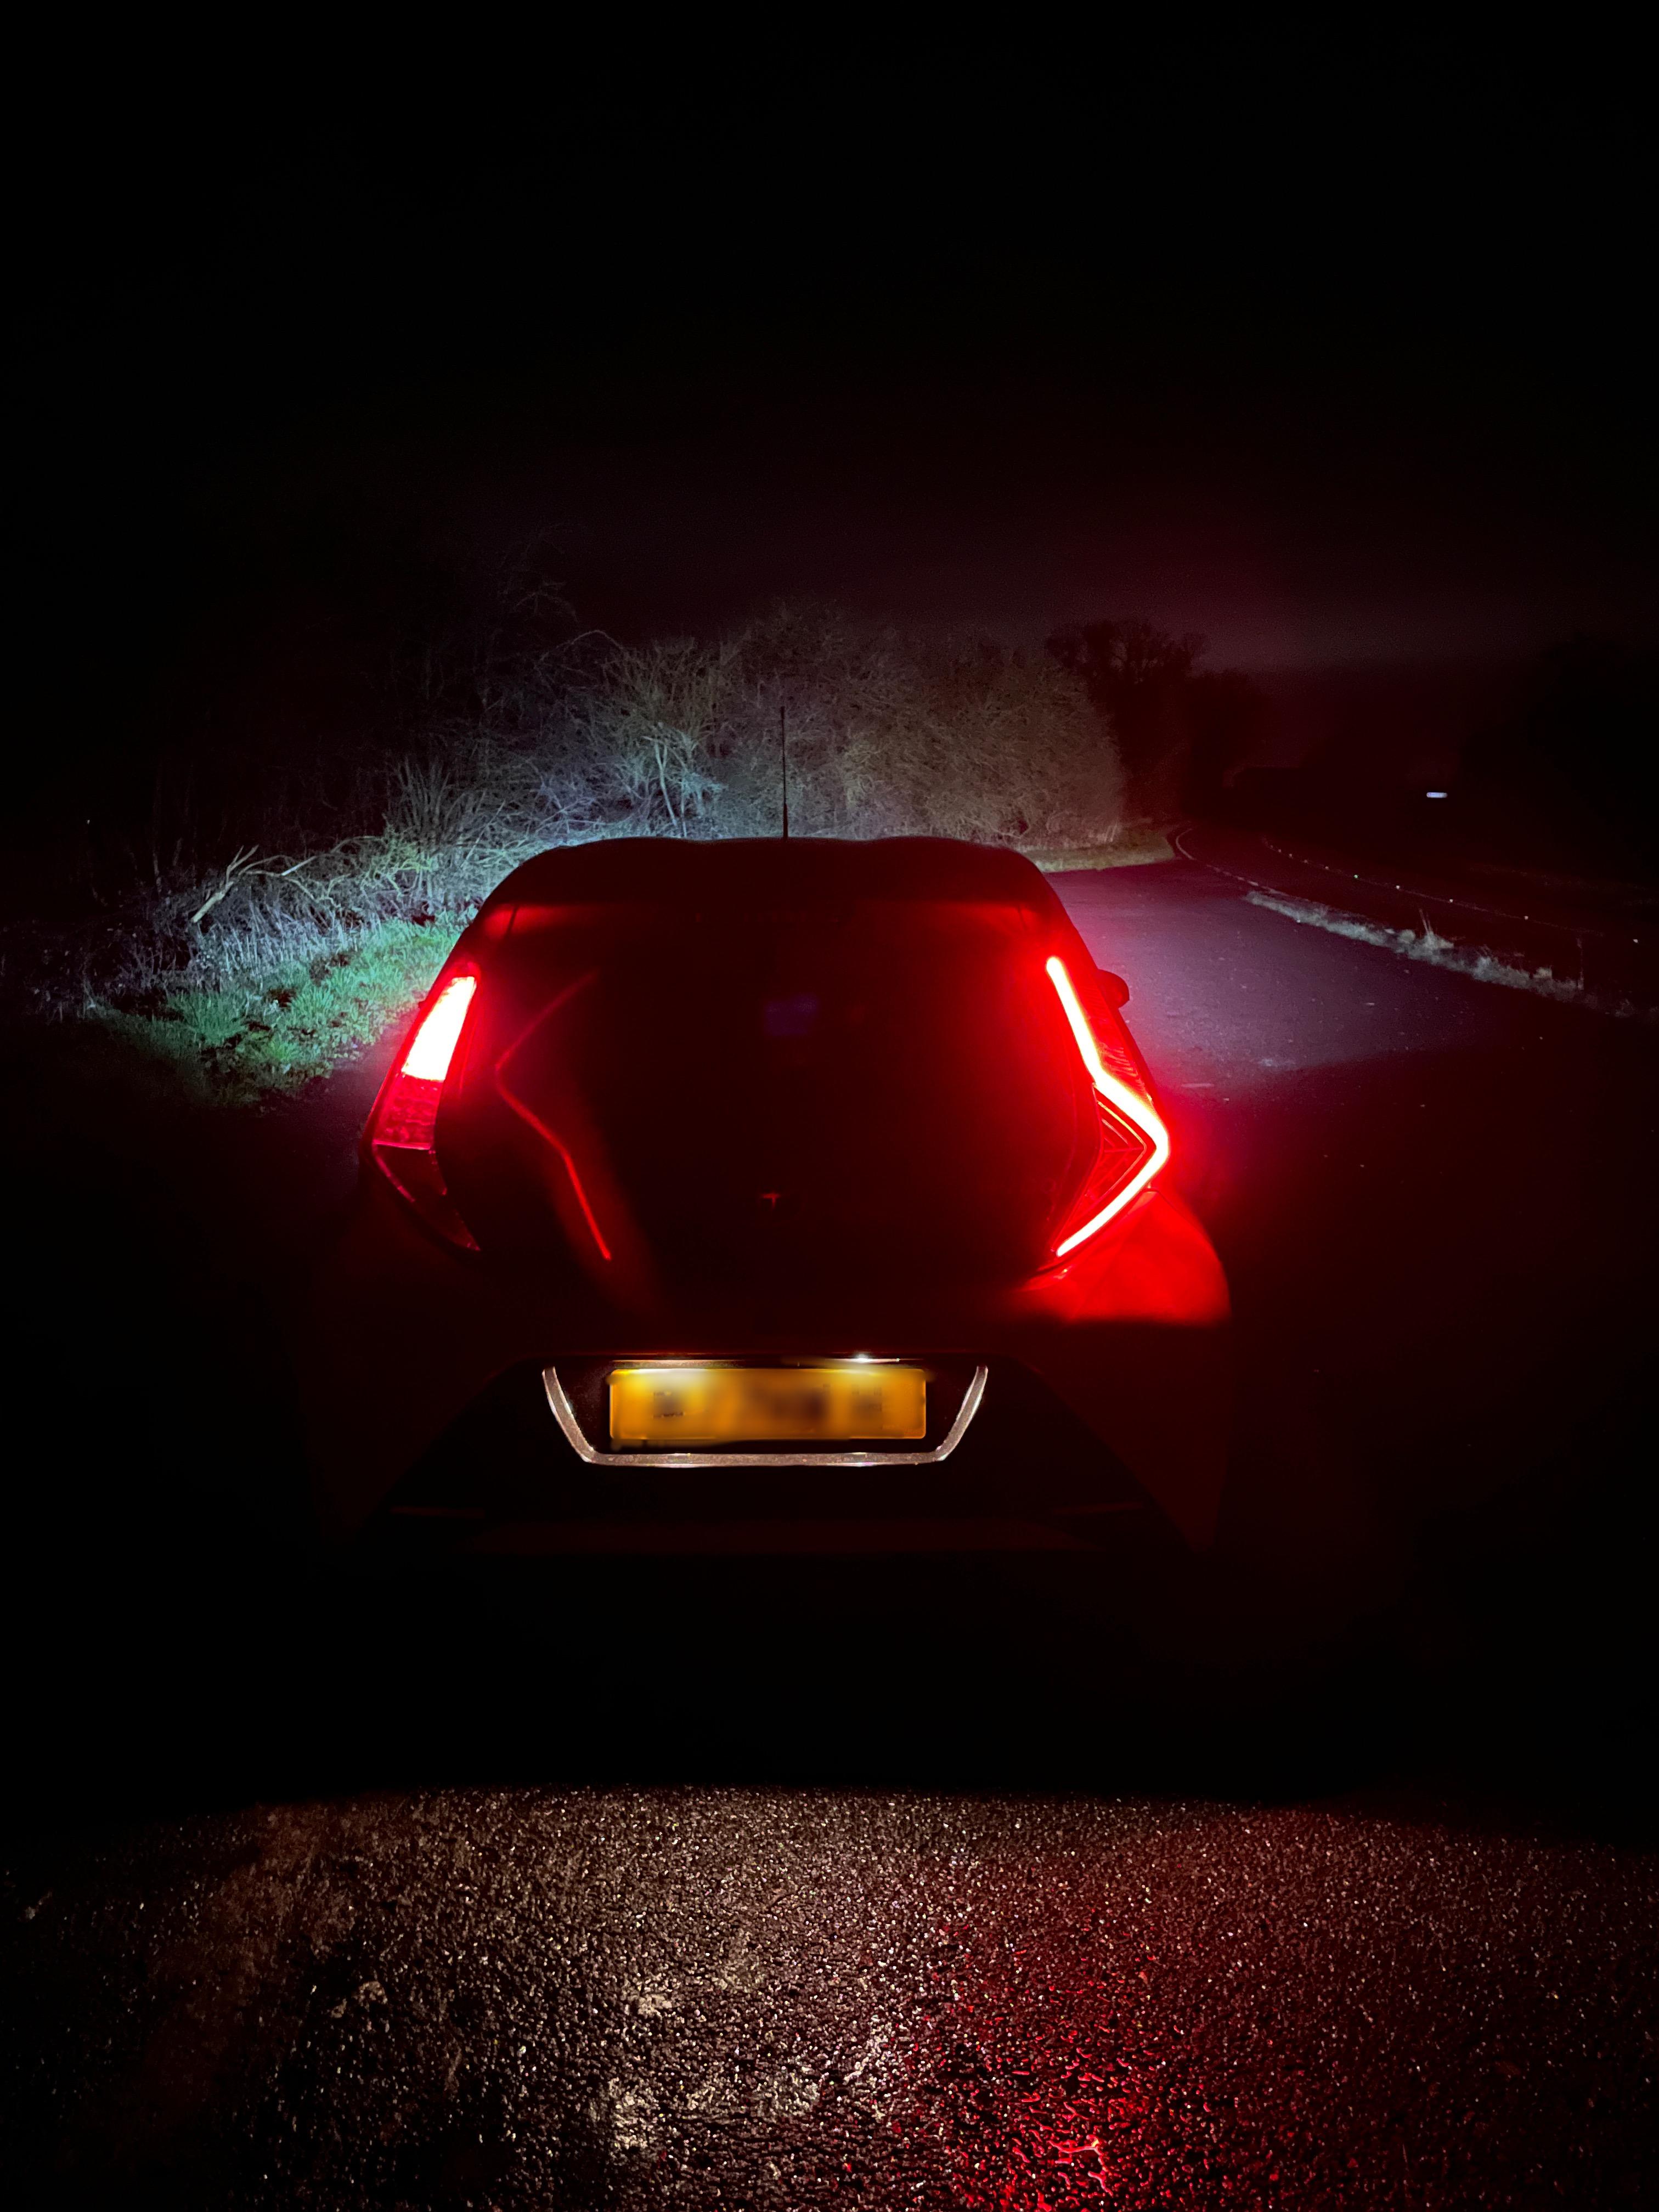 Upgrading rear tail lights to facelift ones? - Aygo & Club - Owners Club - Forum